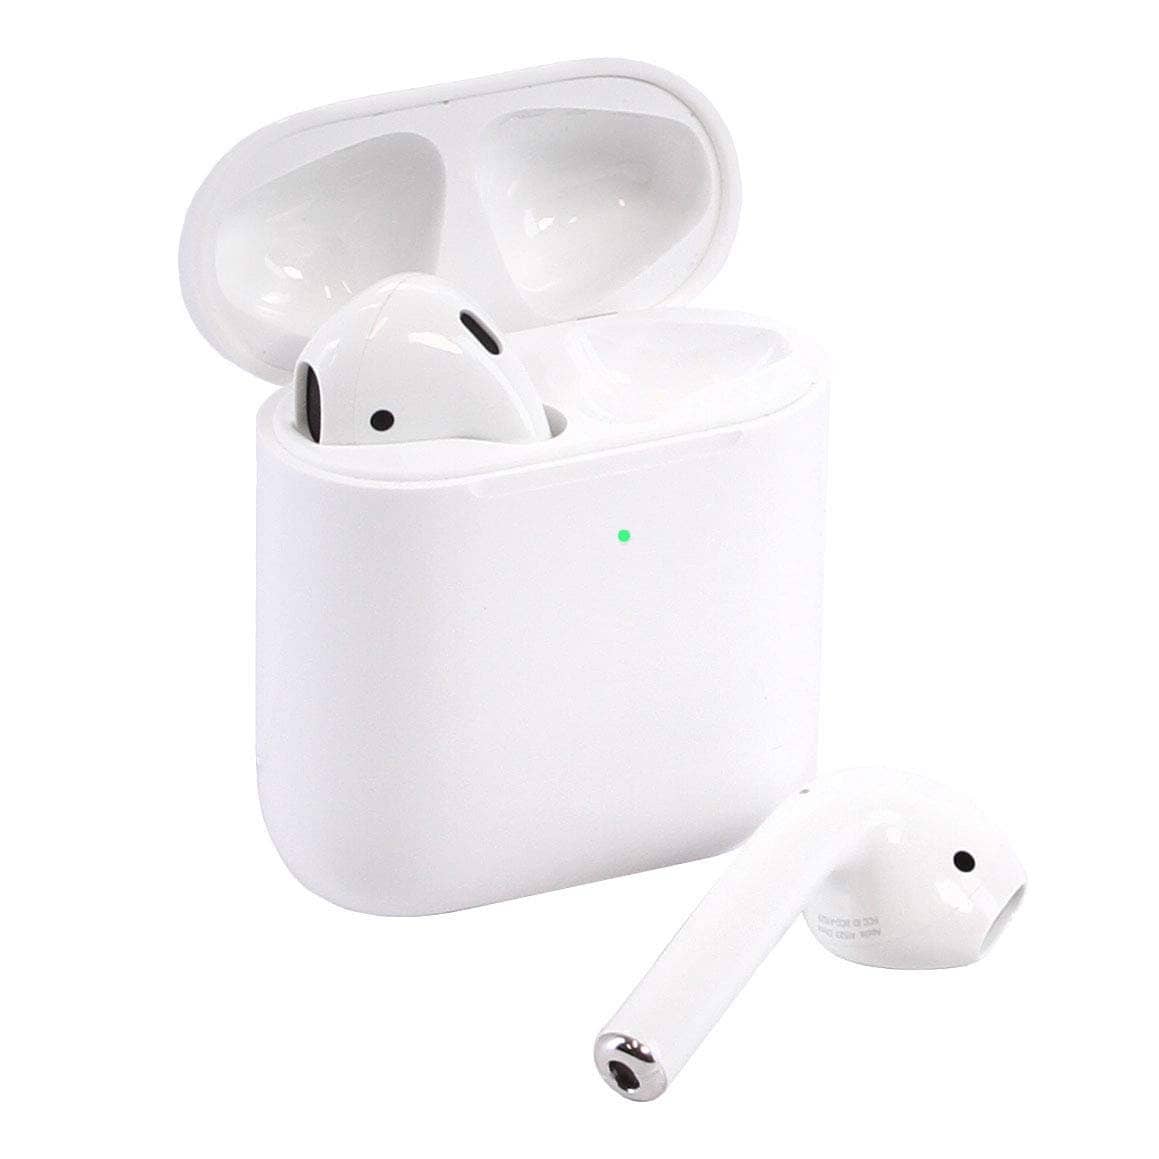 Apple 2019 Airpods 2